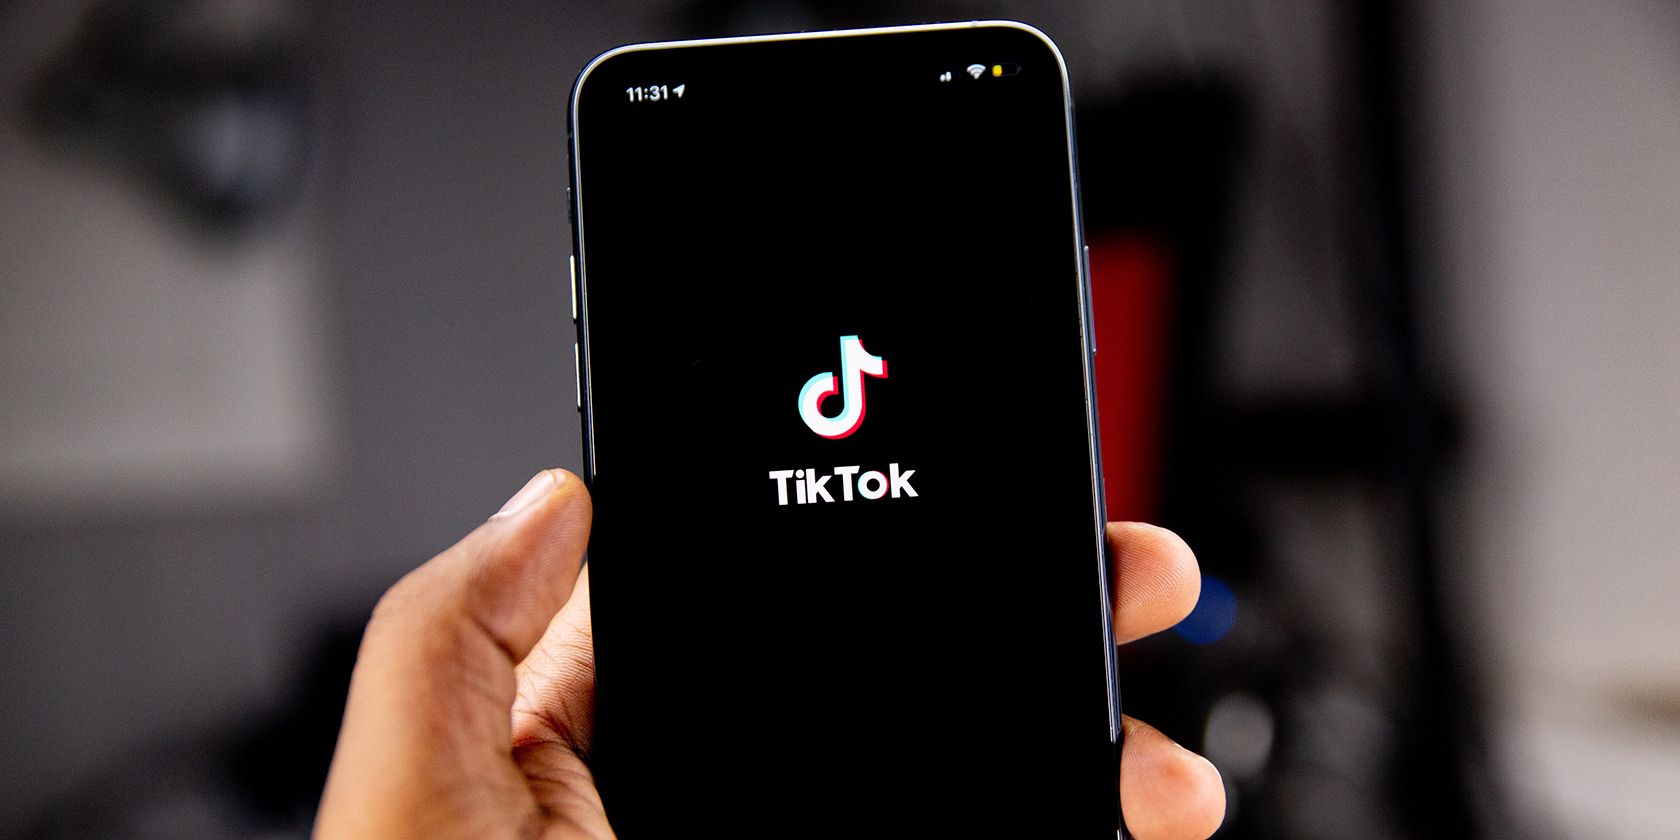 Why Kids Should Not Be Allowed to Watch TikTok Unsupervised